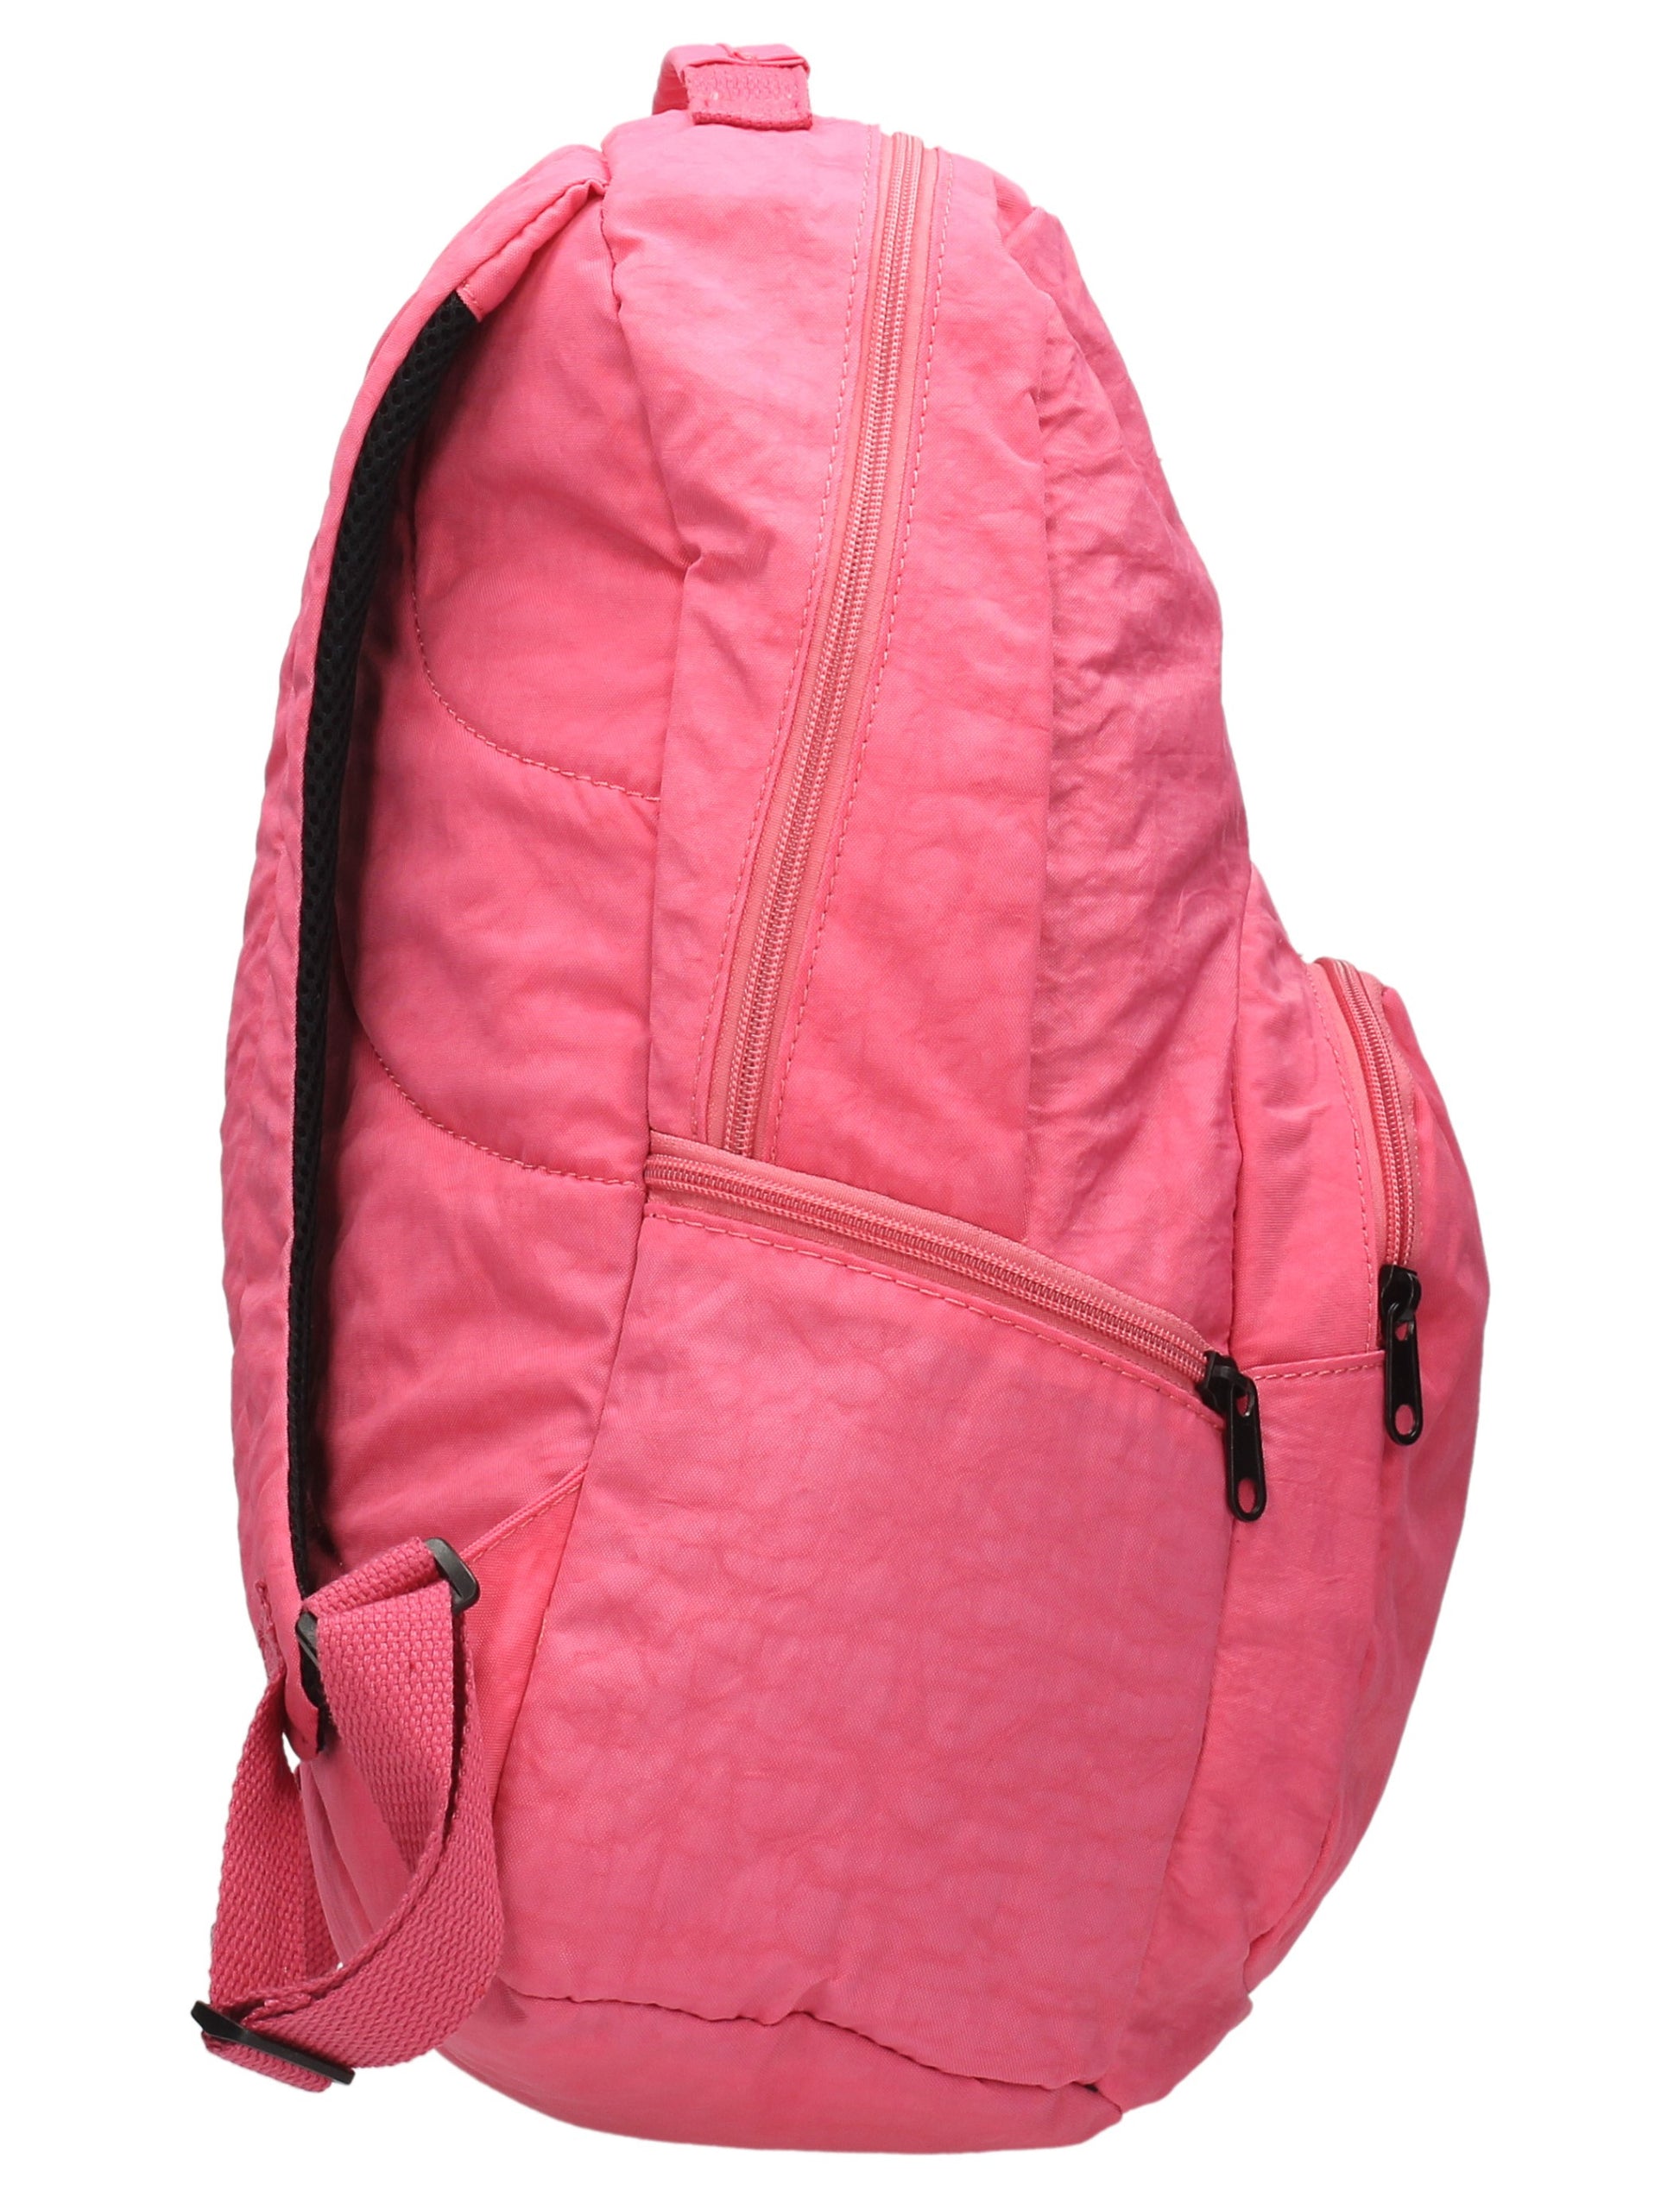 Joseph & Mary Baby Changing Backpack - Pink-Baby Changing-SWANKYSWANS